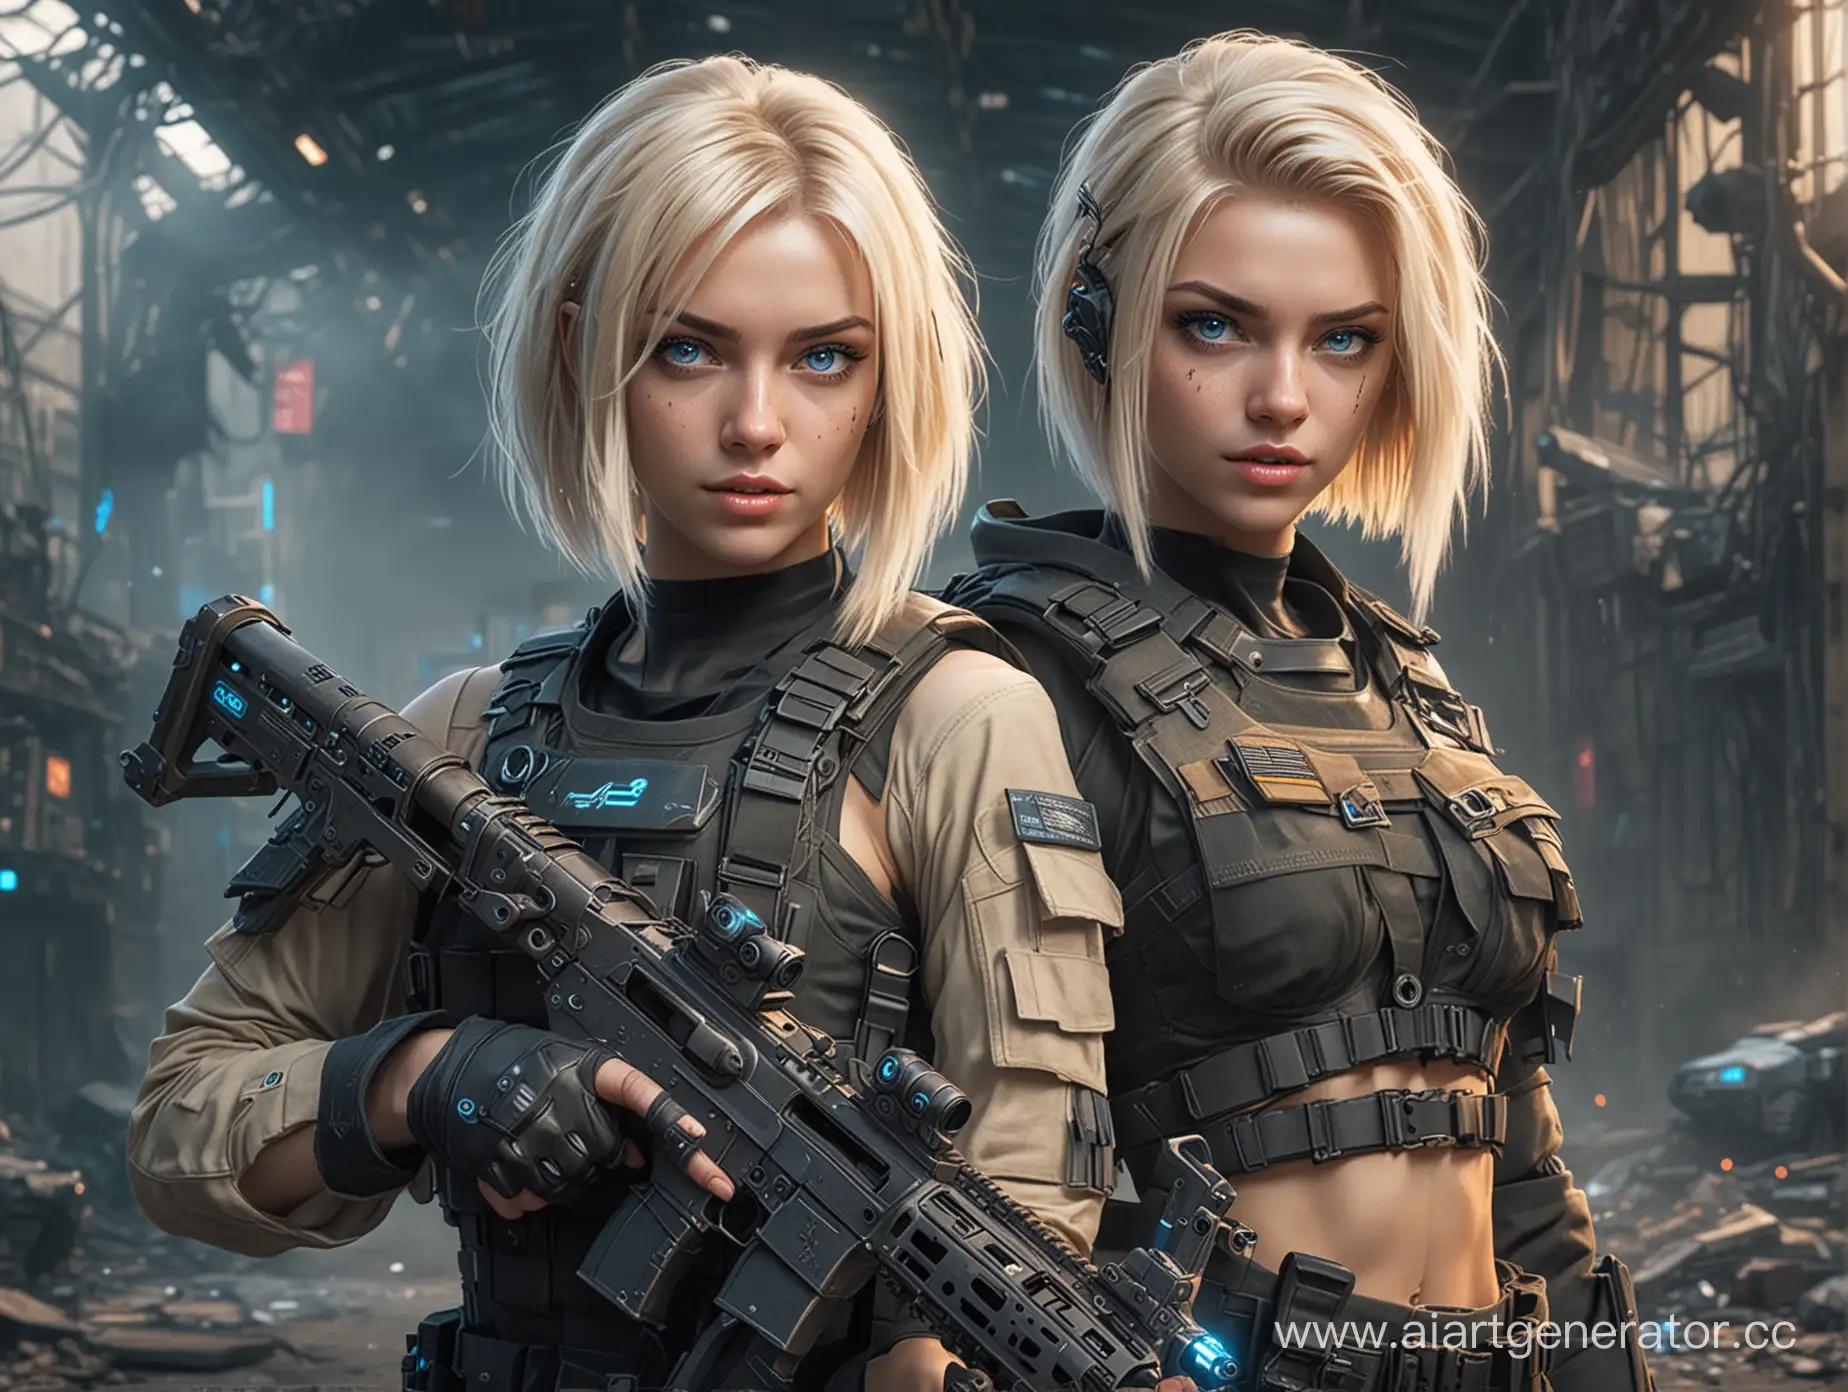 Blonde-Cyberpunk-Twitch-Streamer-with-Weapons-in-PostApocalyptic-Setting